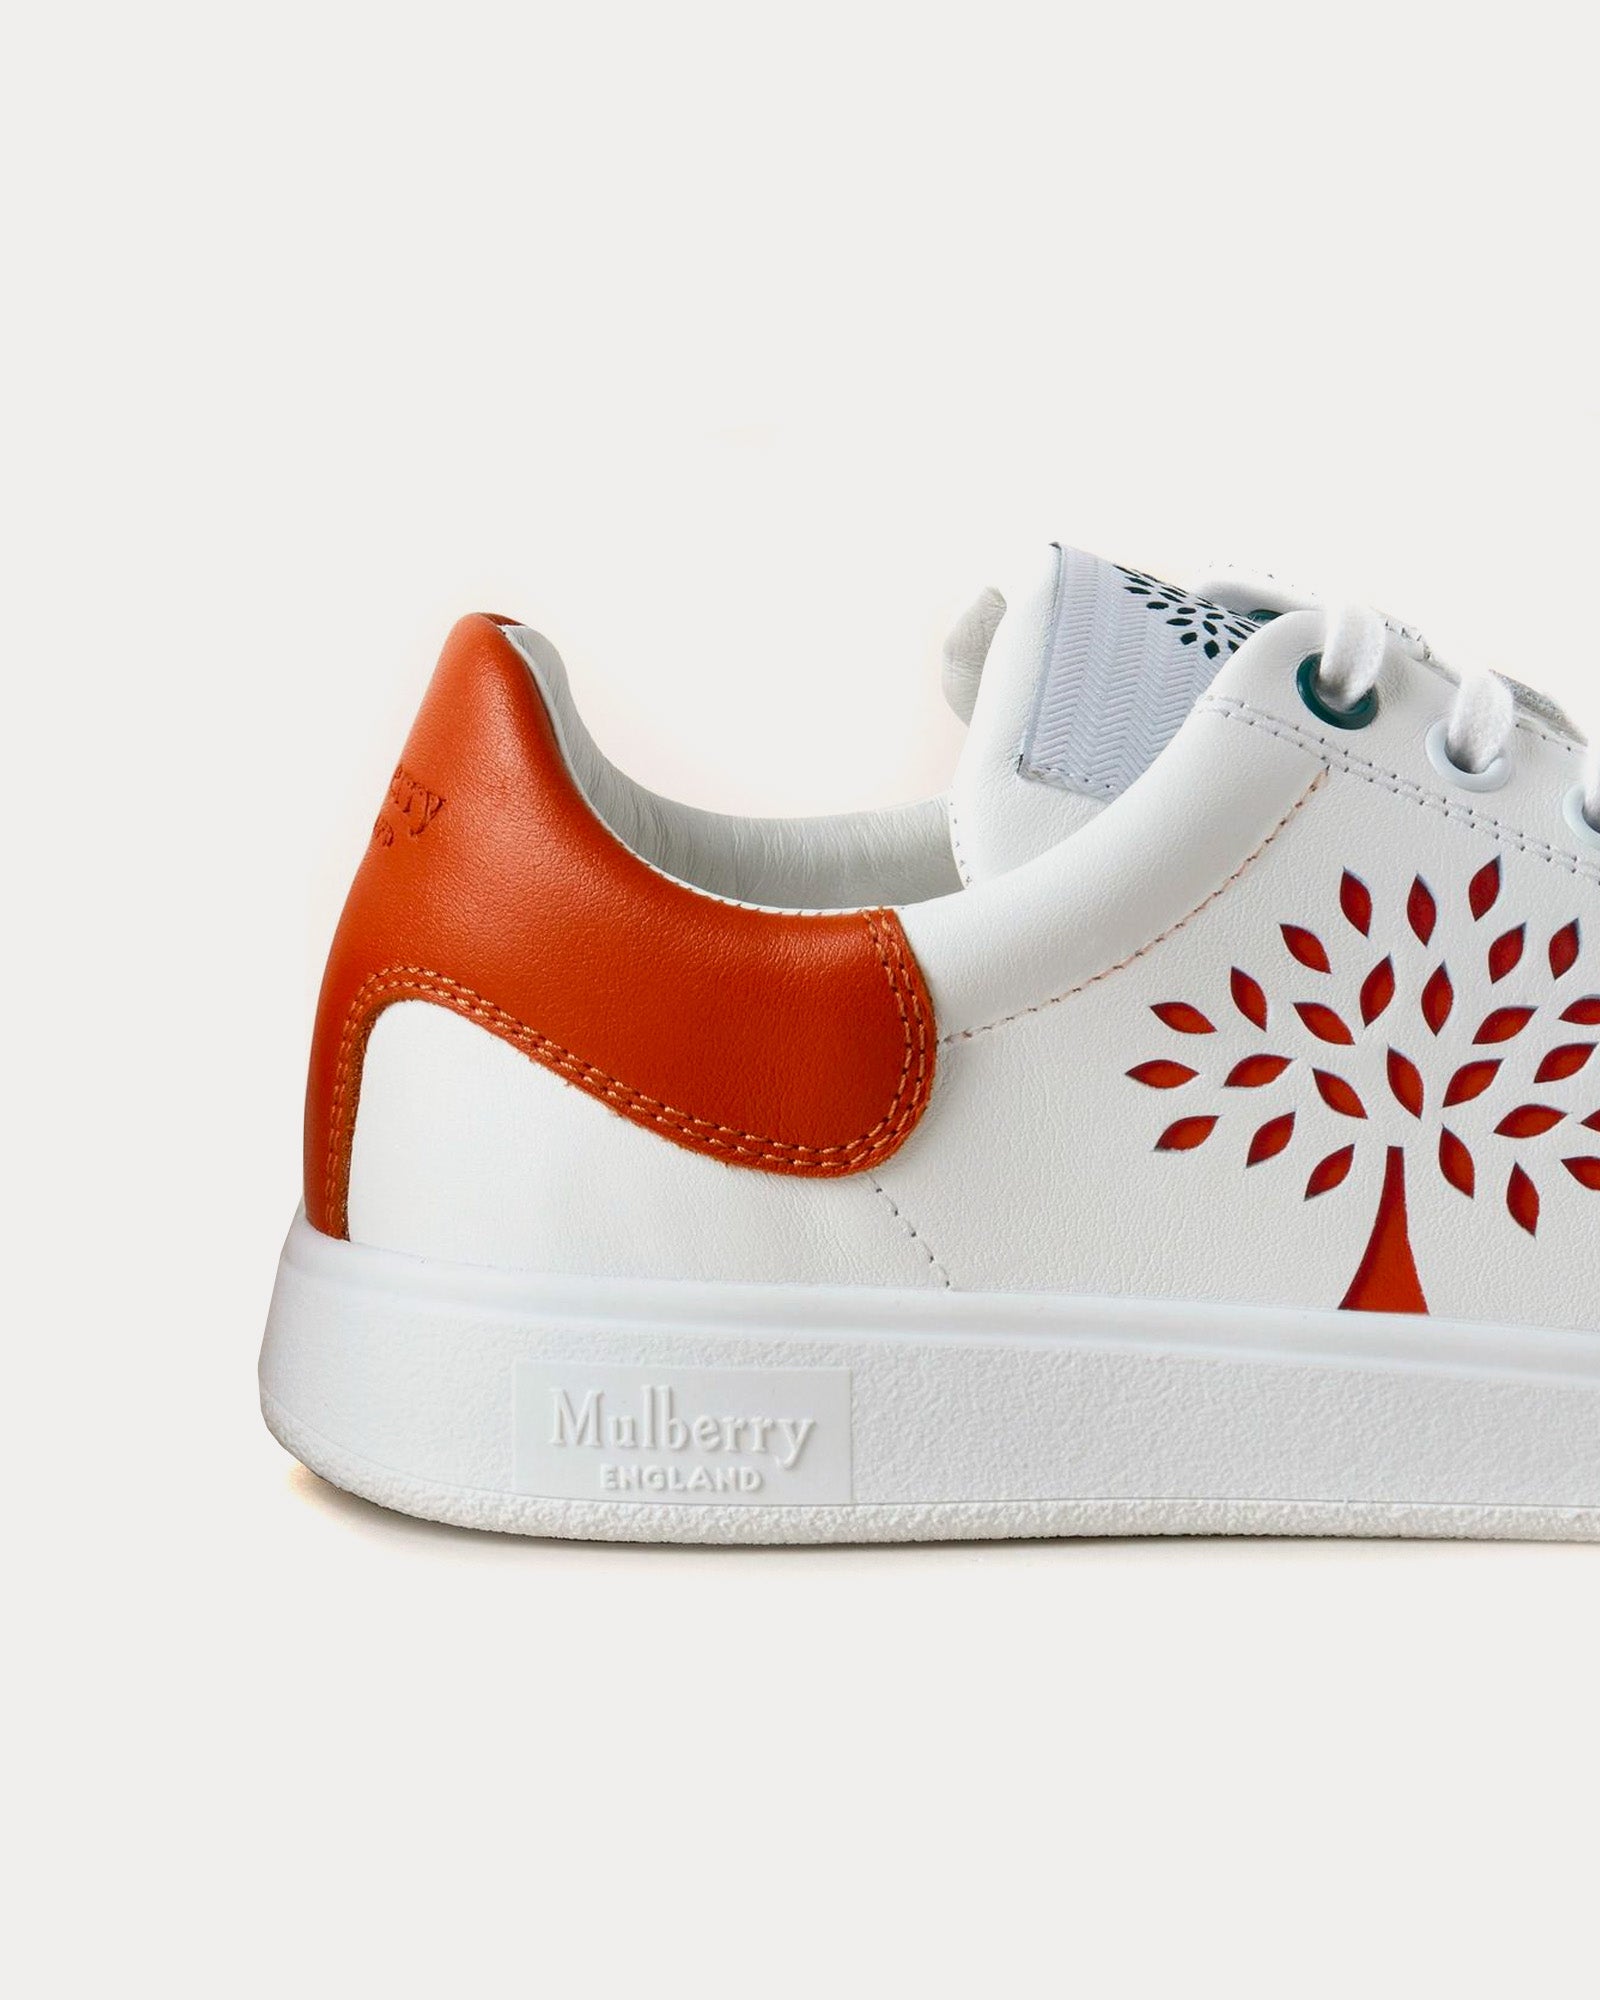 Mulberry - Tree Tennis Bovine Leather Coral Orange Low Top Sneakers